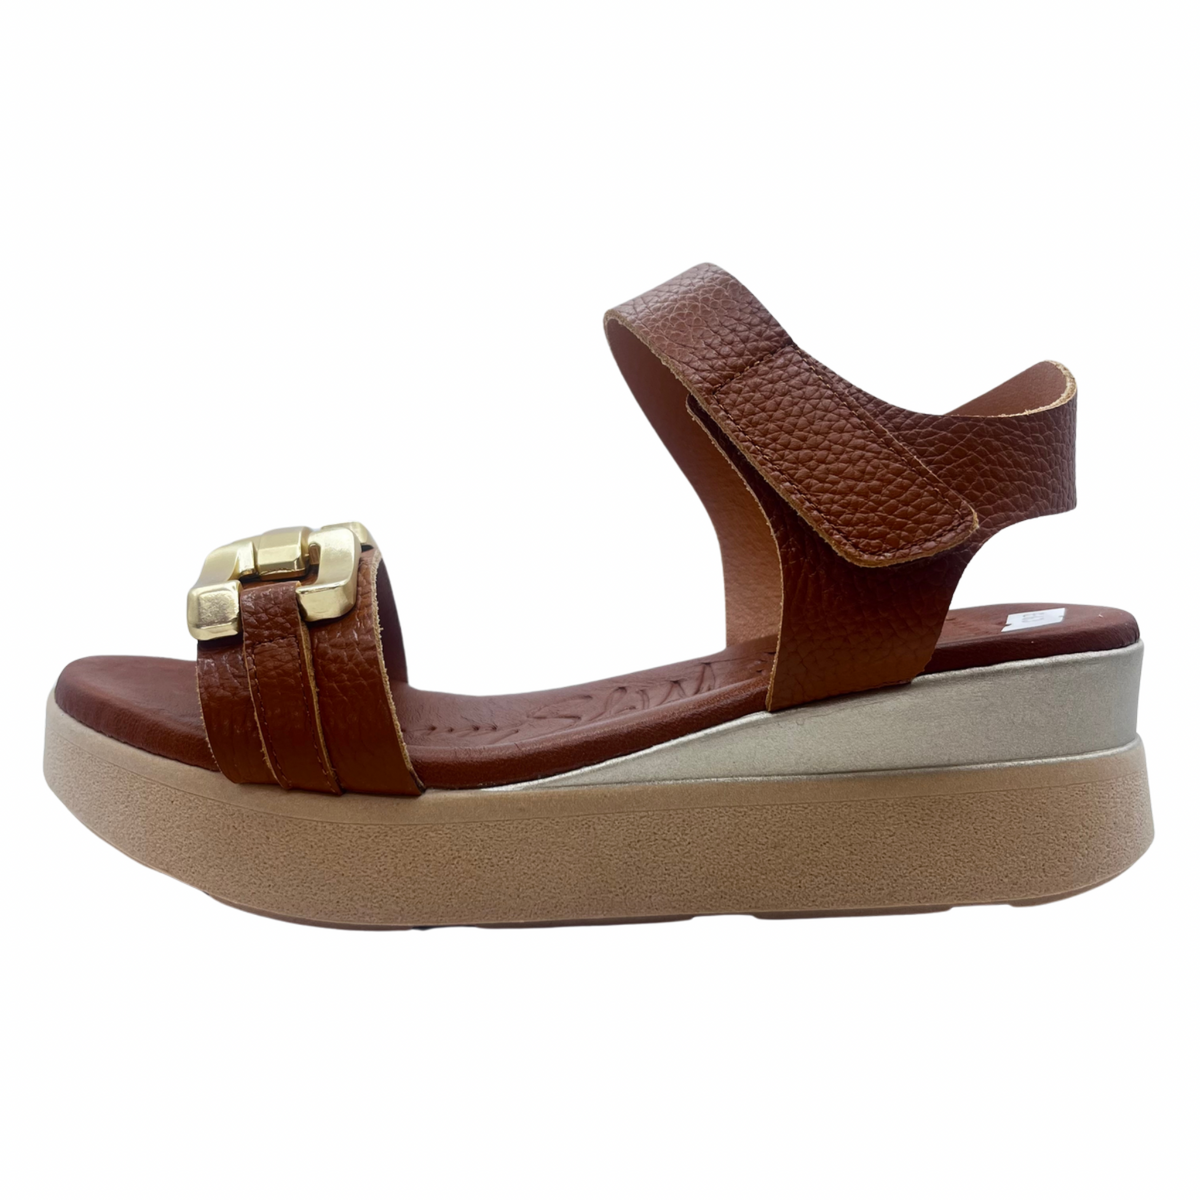 Oh My Sandals Brown Wedge Leather Sandal